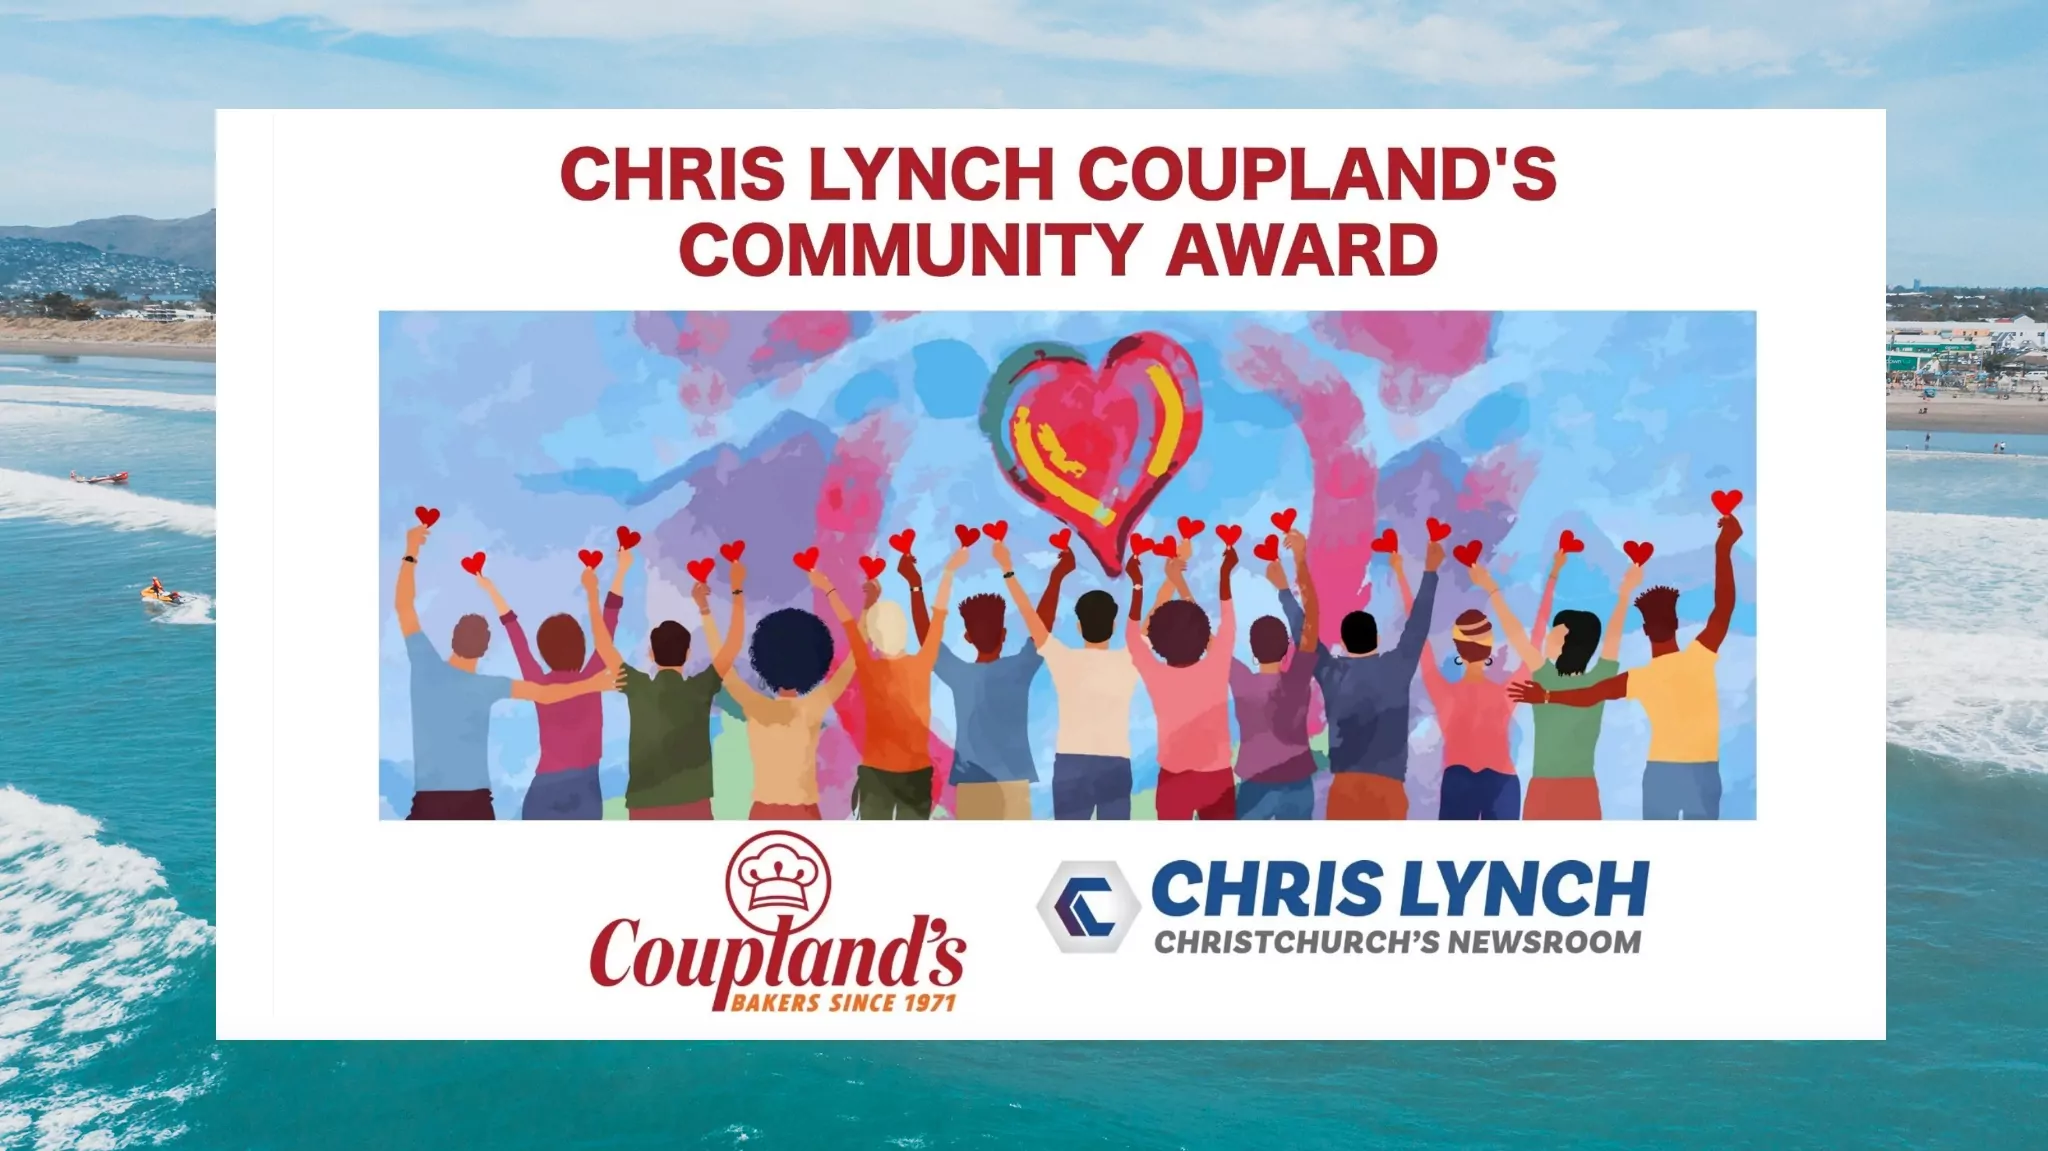 Nominate a community minded person for the Chris Lynch Coupland’s Community Award